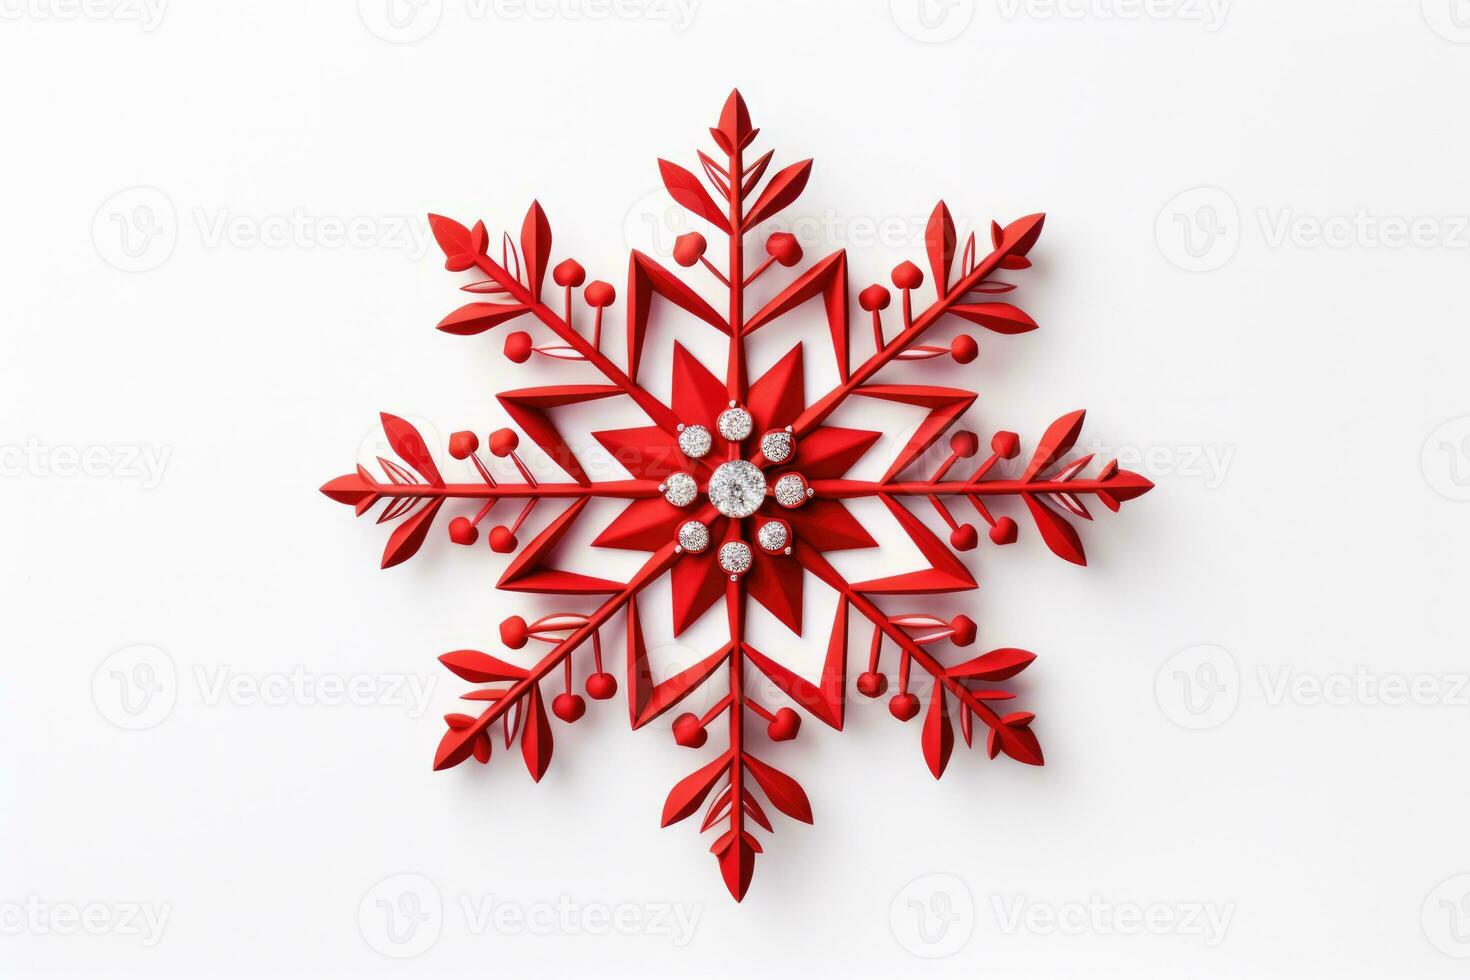 Handcrafted Christmas card with snowflake decorations isolated on a white background photo